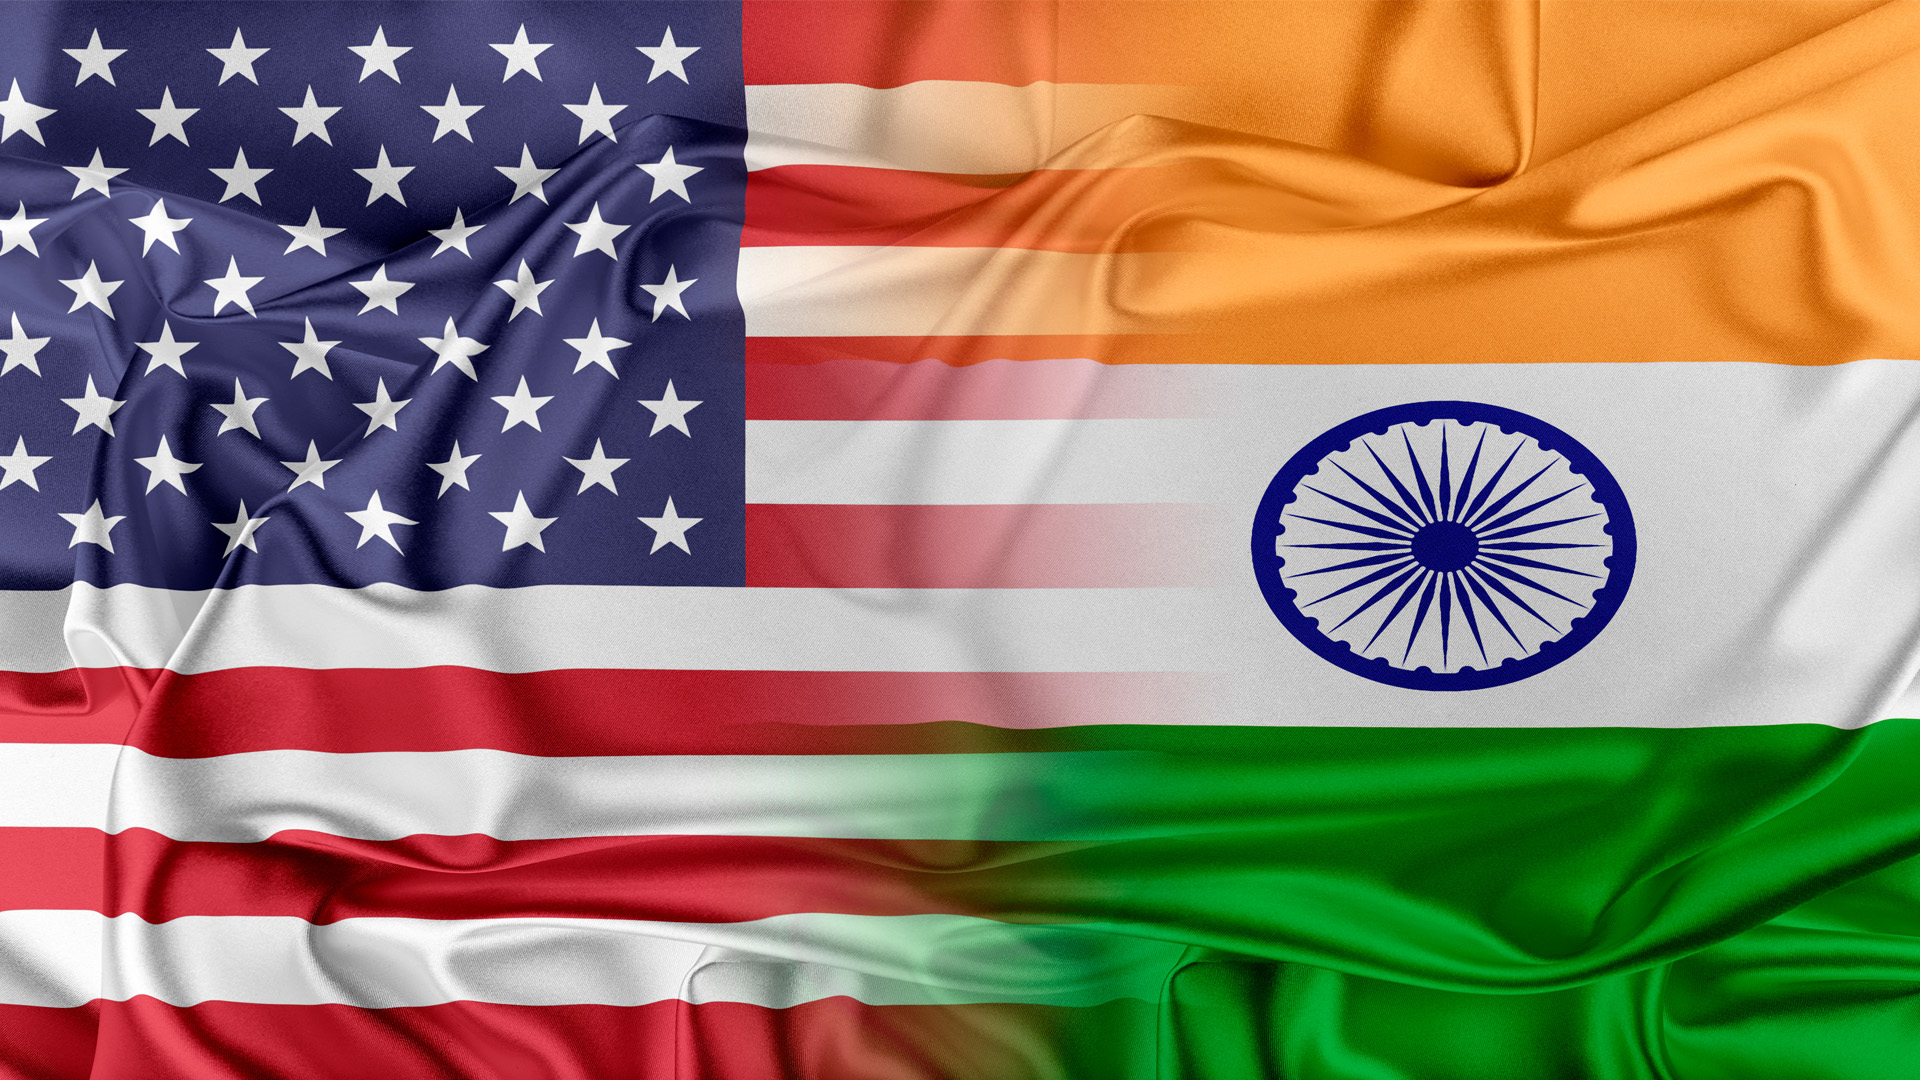 The United States of America flag merged with the India flag graphic 